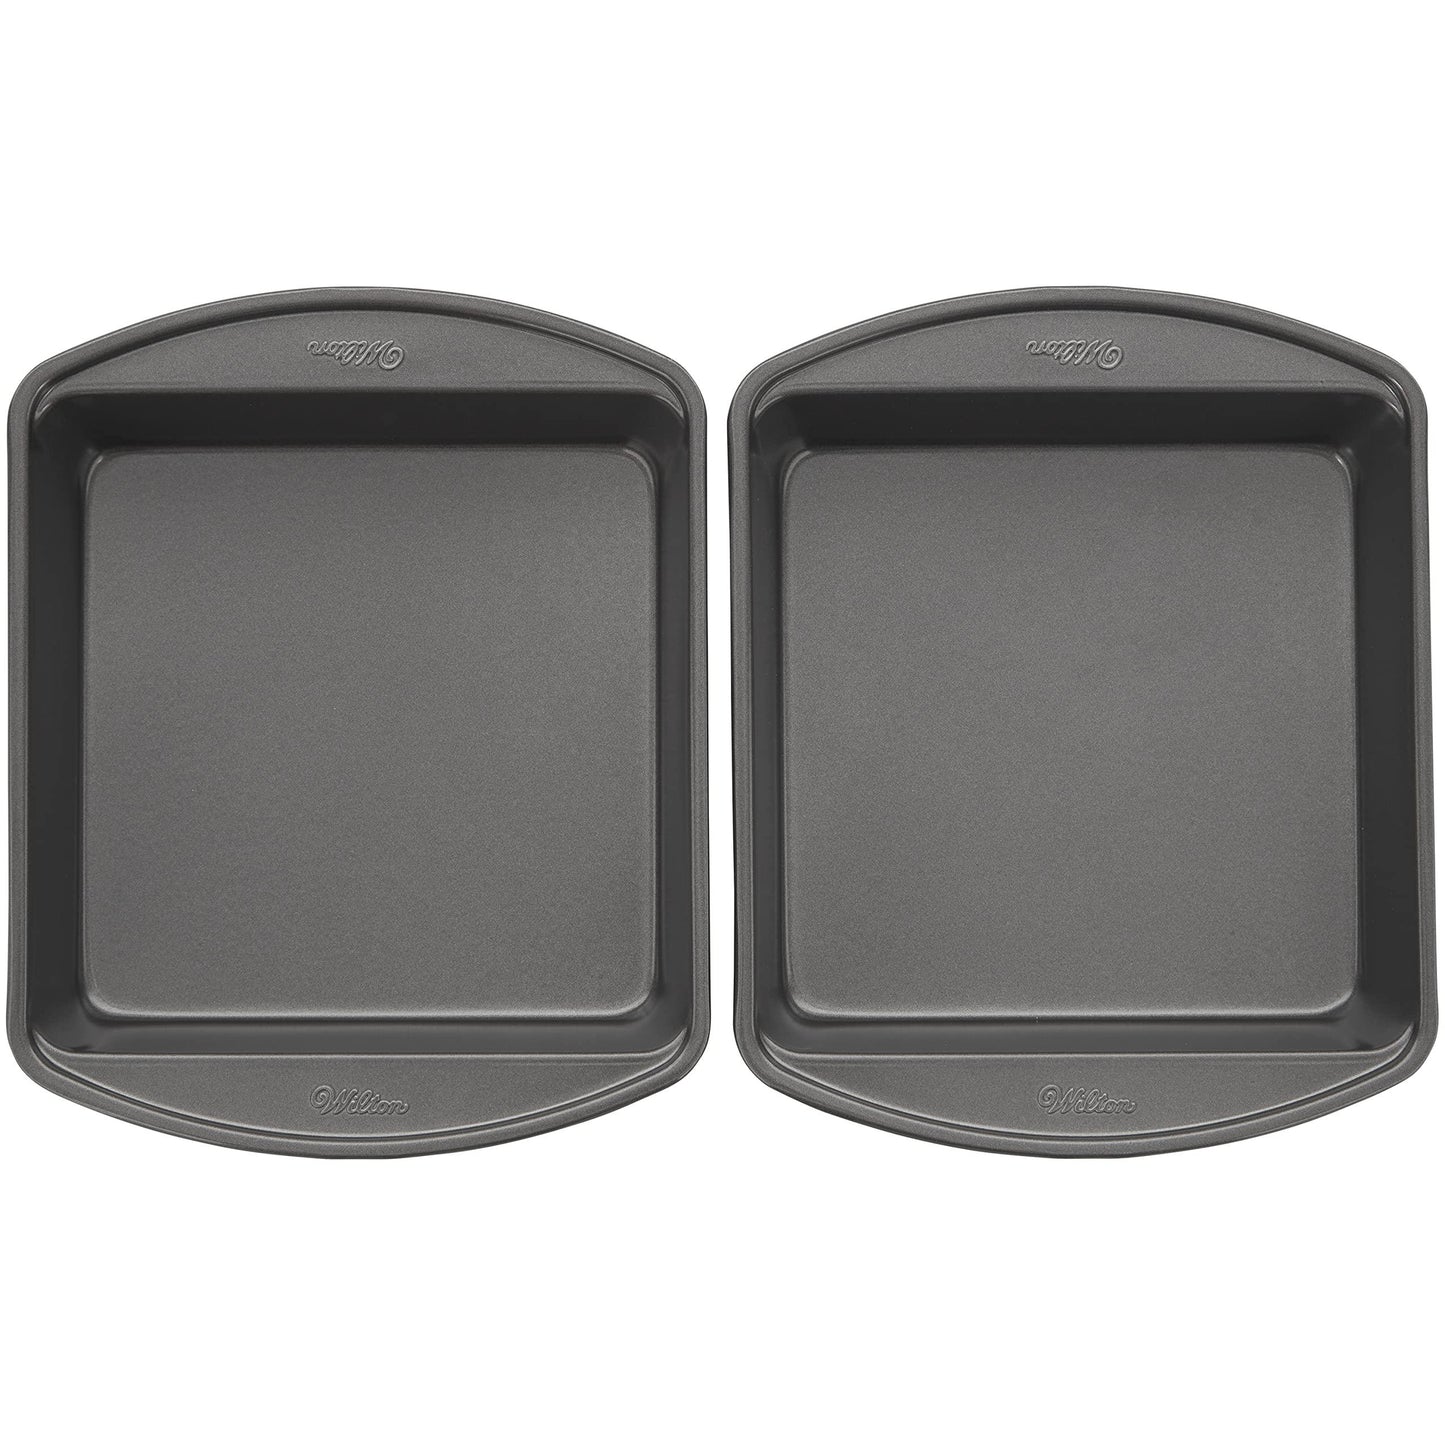 Wilton Perfect Results Premium Non-Stick 8-Inch Square Cake Pans, Set of 2, Steel Bakeware Set - CookCave